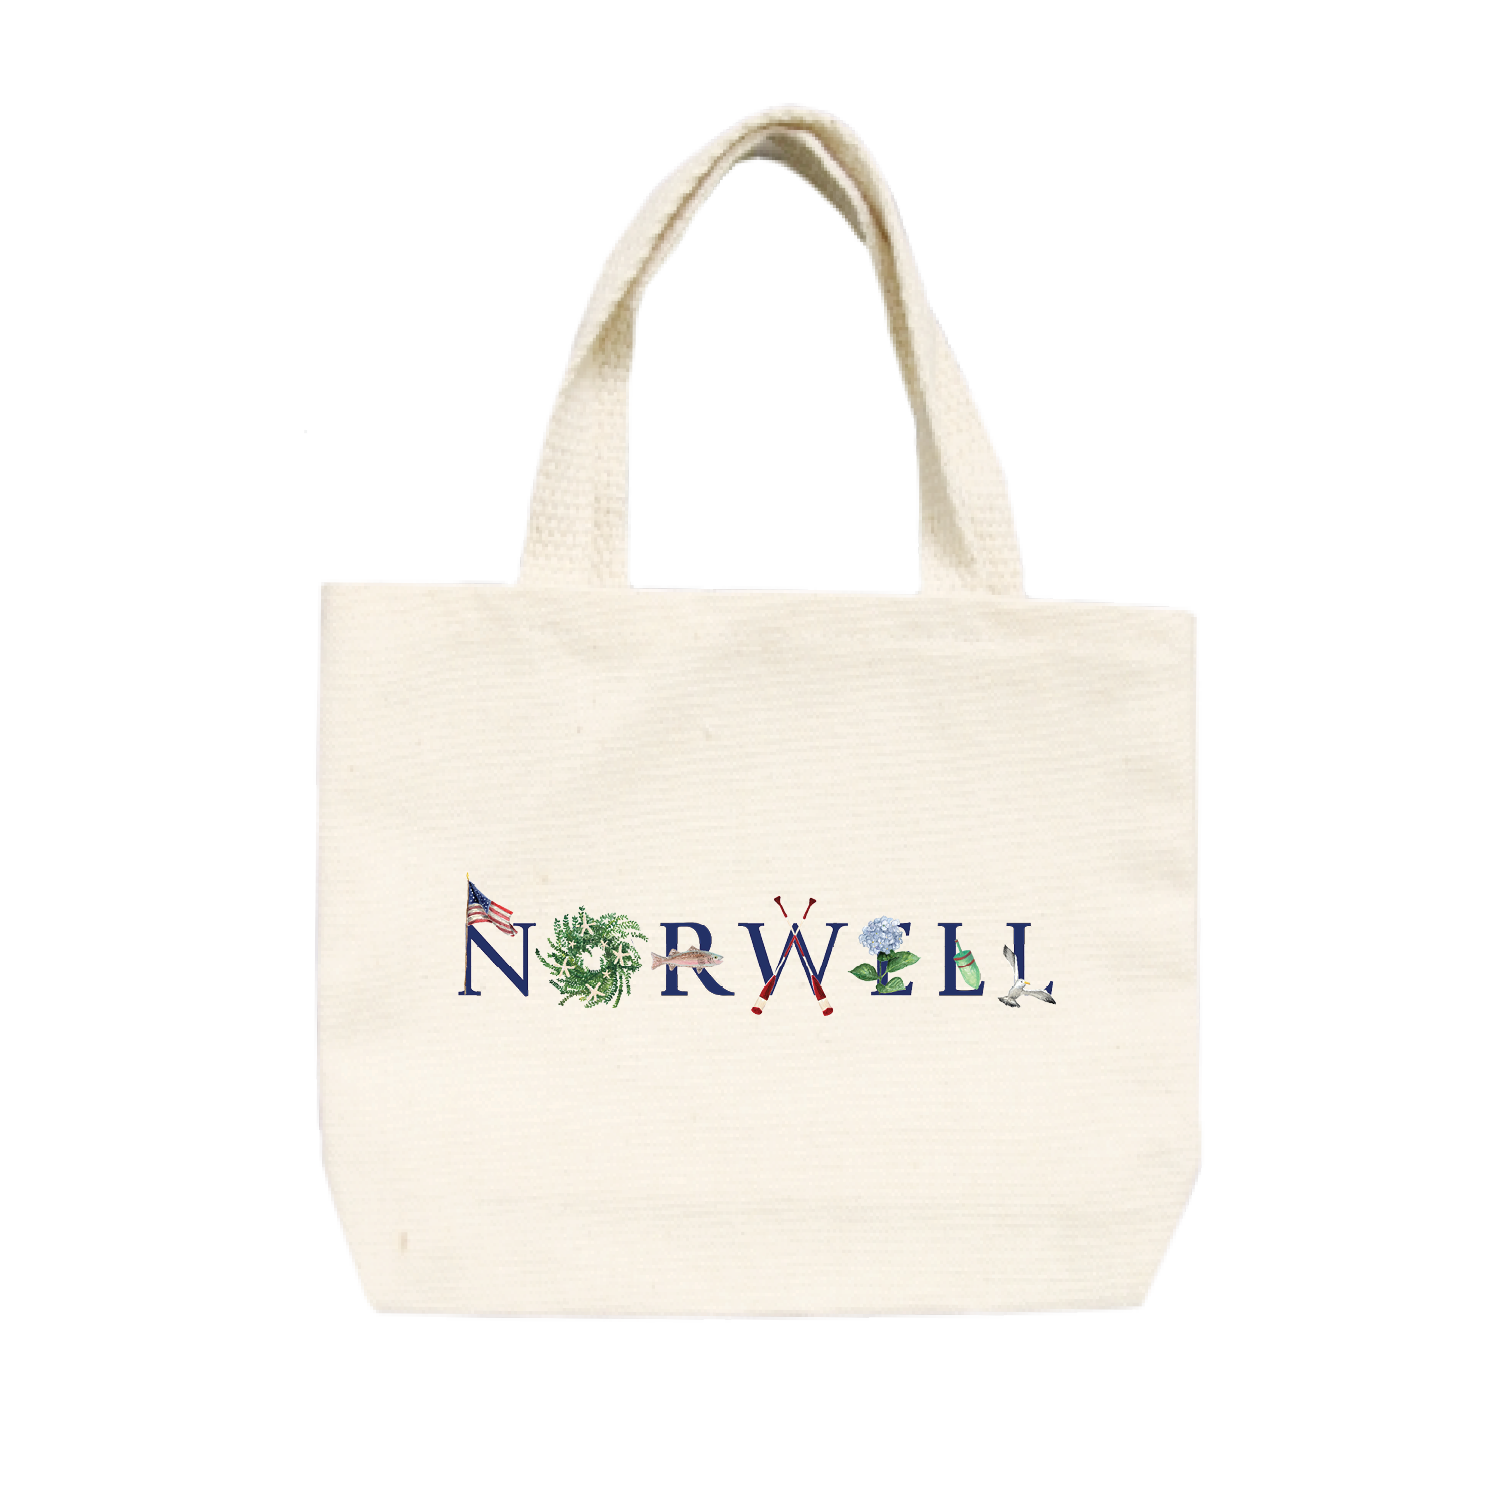 Norwell small tote